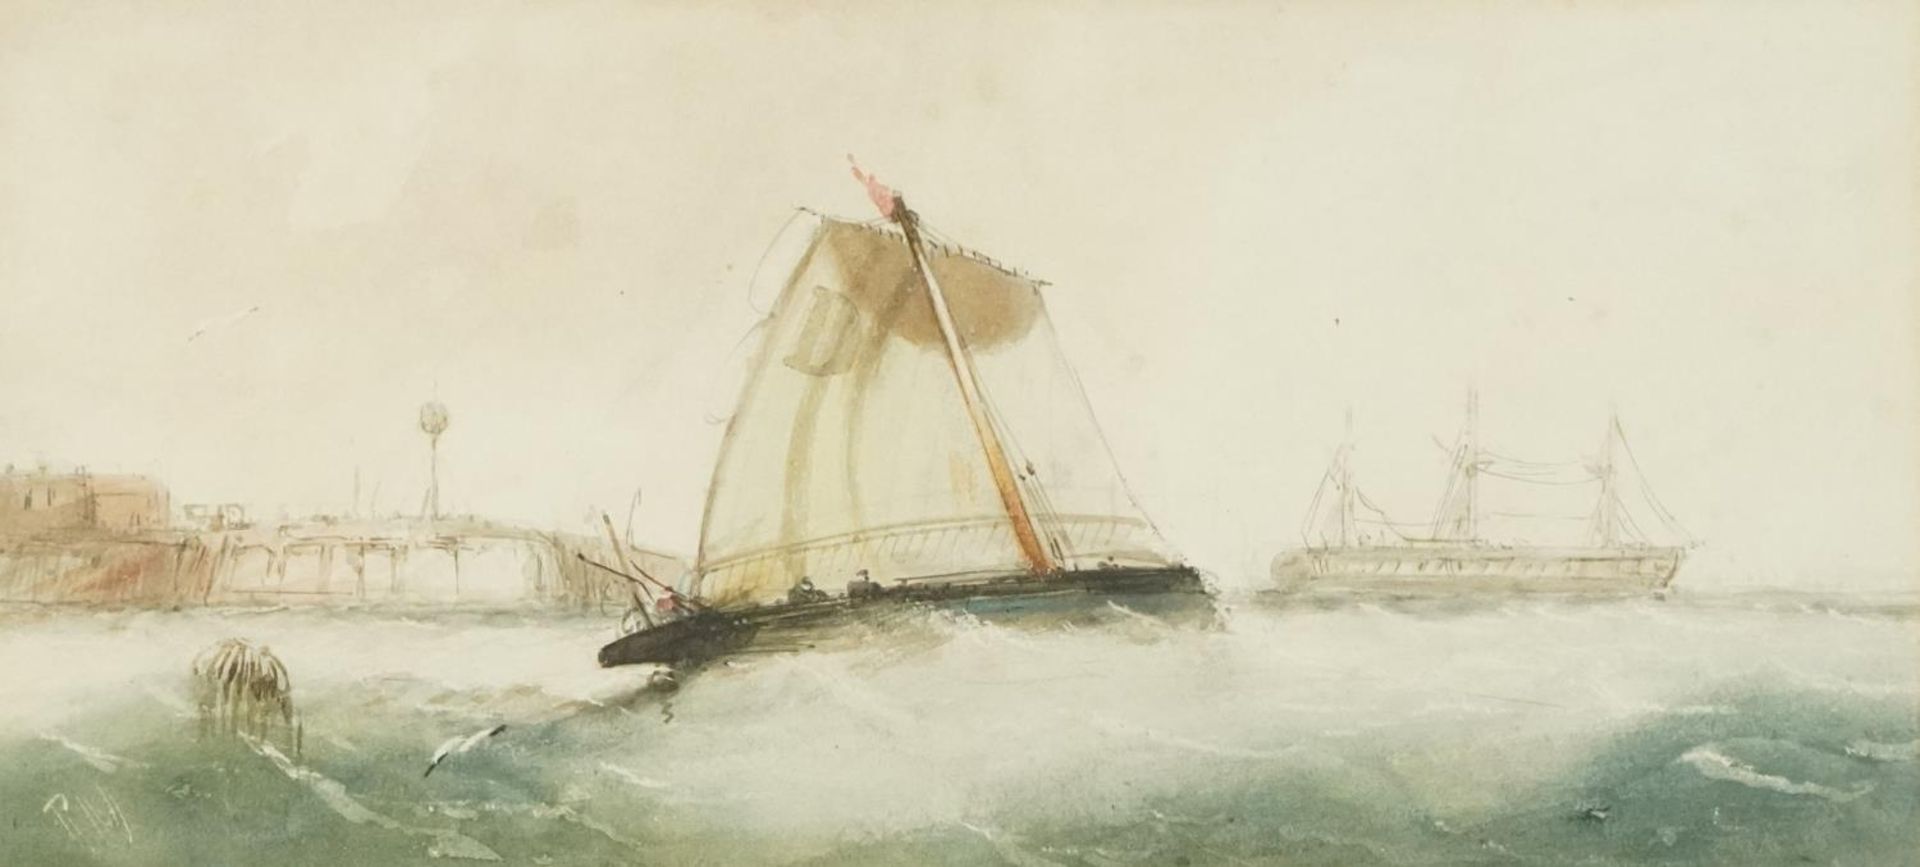 Richmond Markes - Off the South Coast, Victorian naval interest watercolour, mounted, framed and